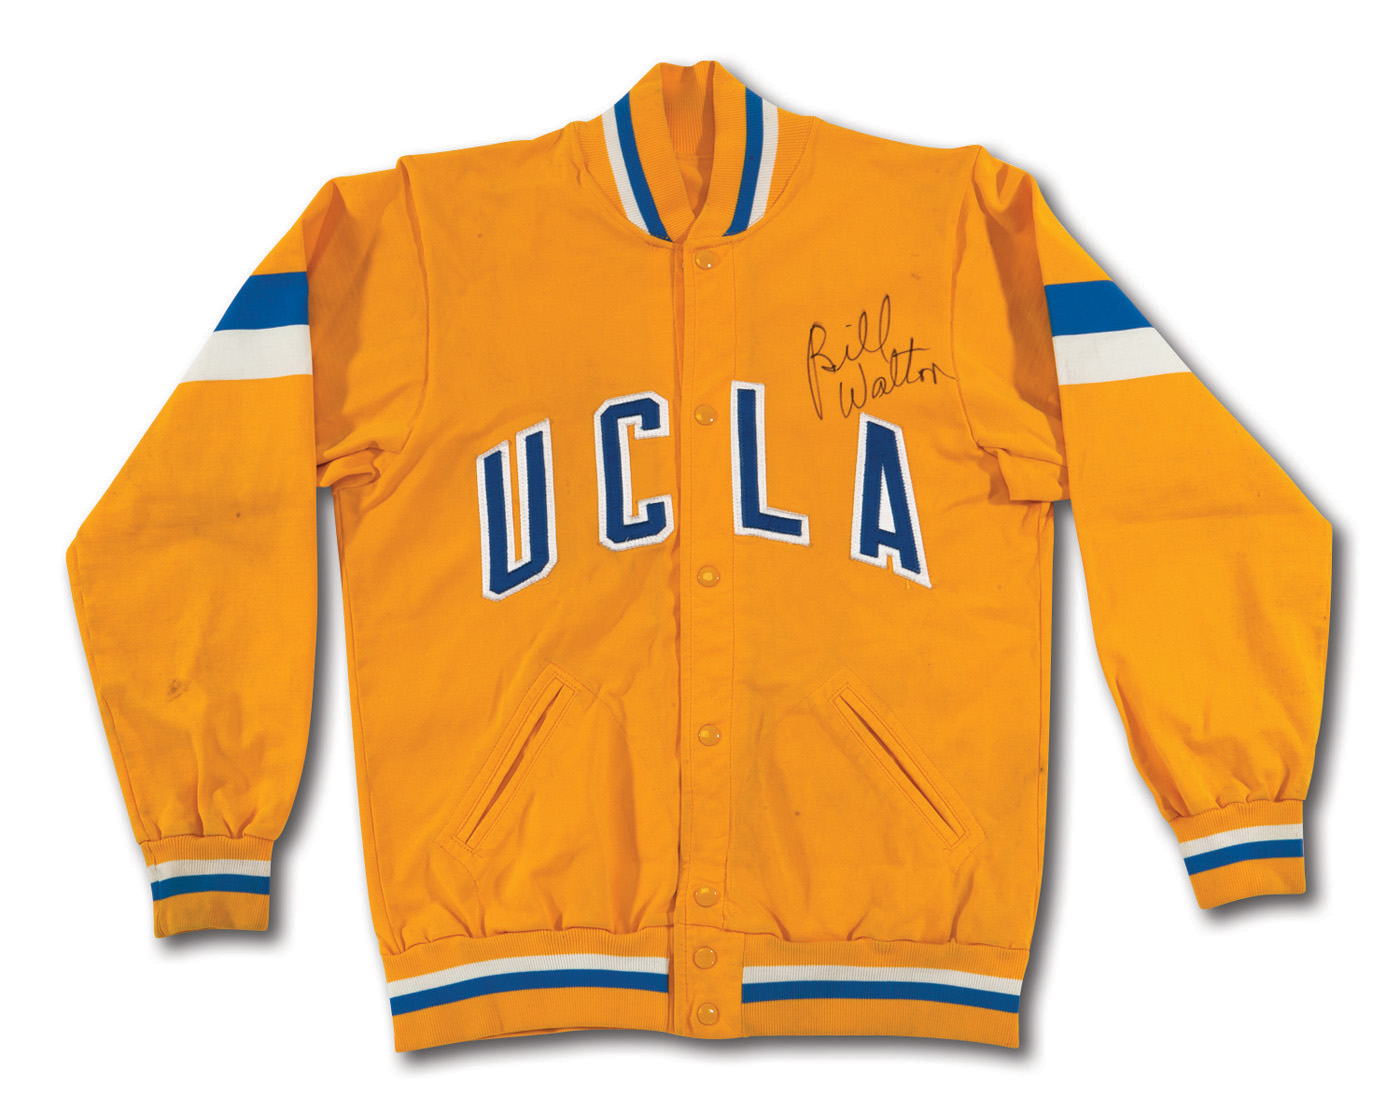 Game-worn Bill Russell Celtics warm-up jacket up for auction